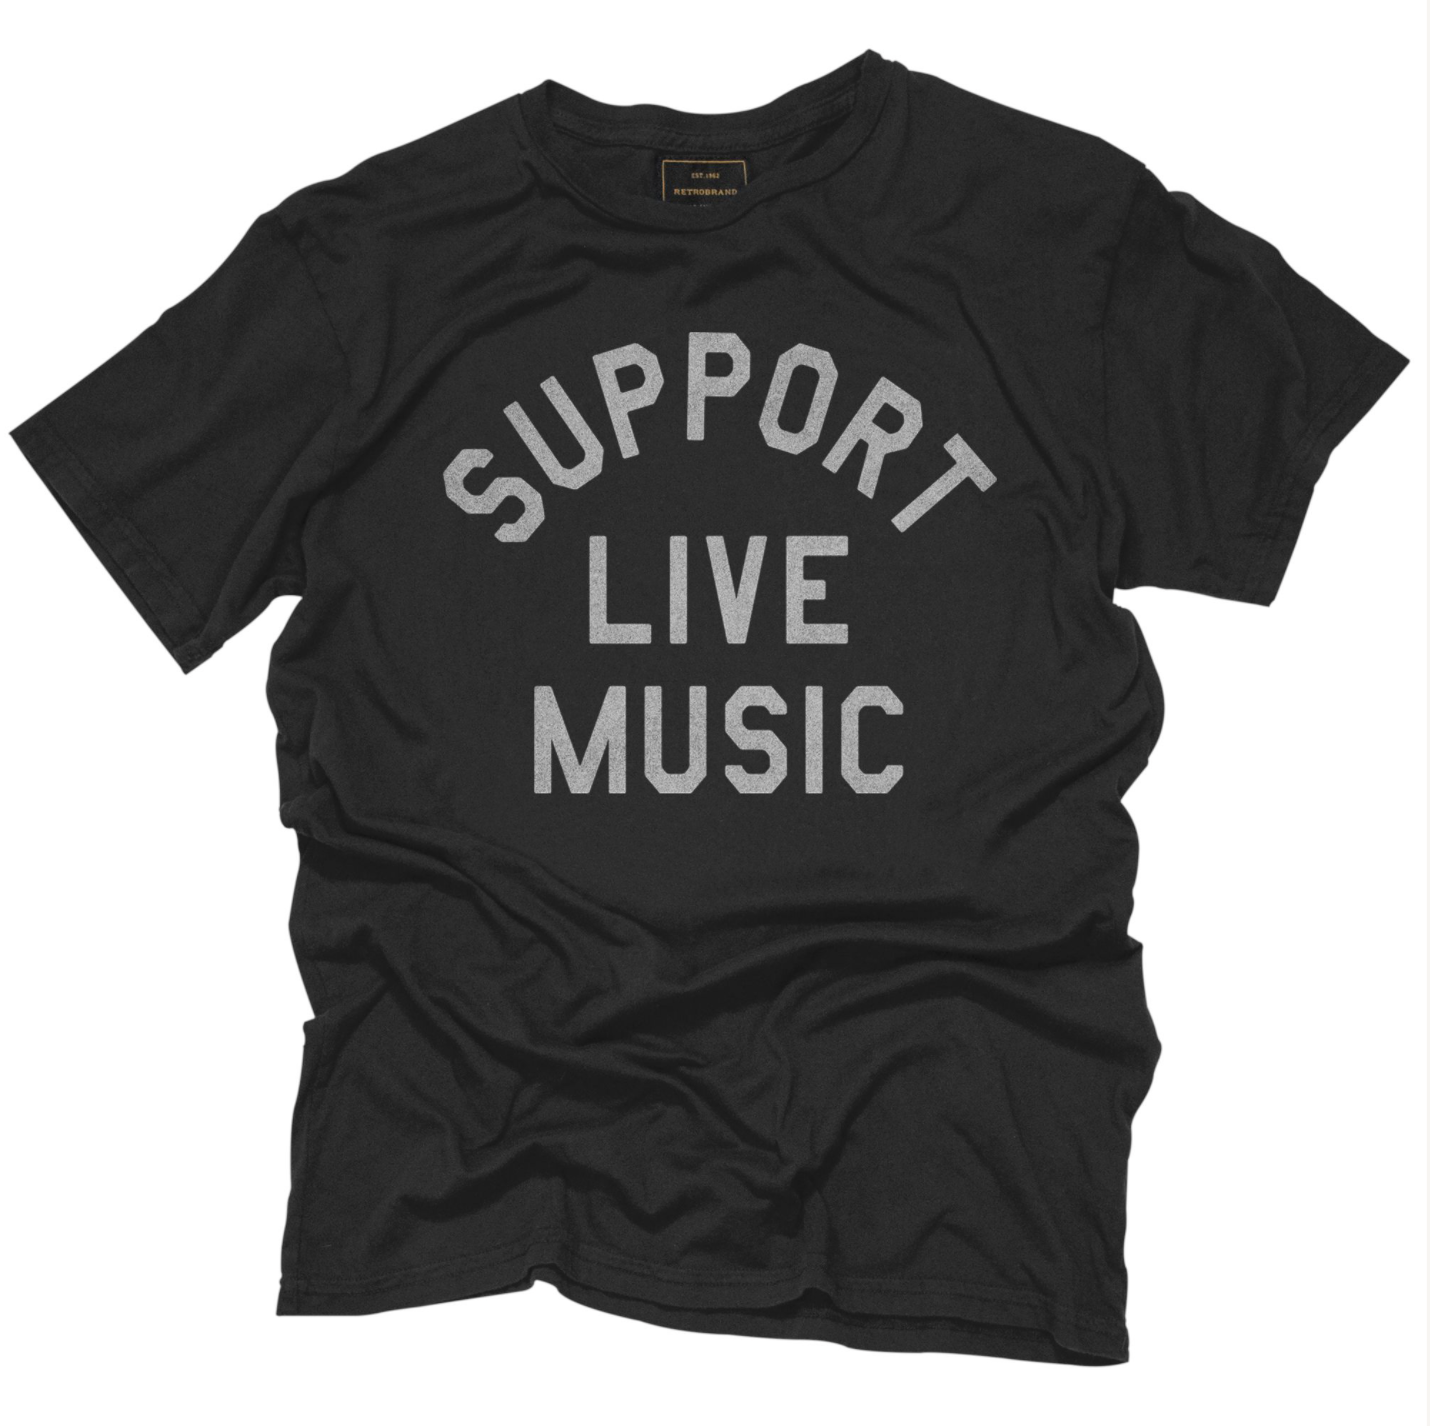 Support Live Music Black Label Tee